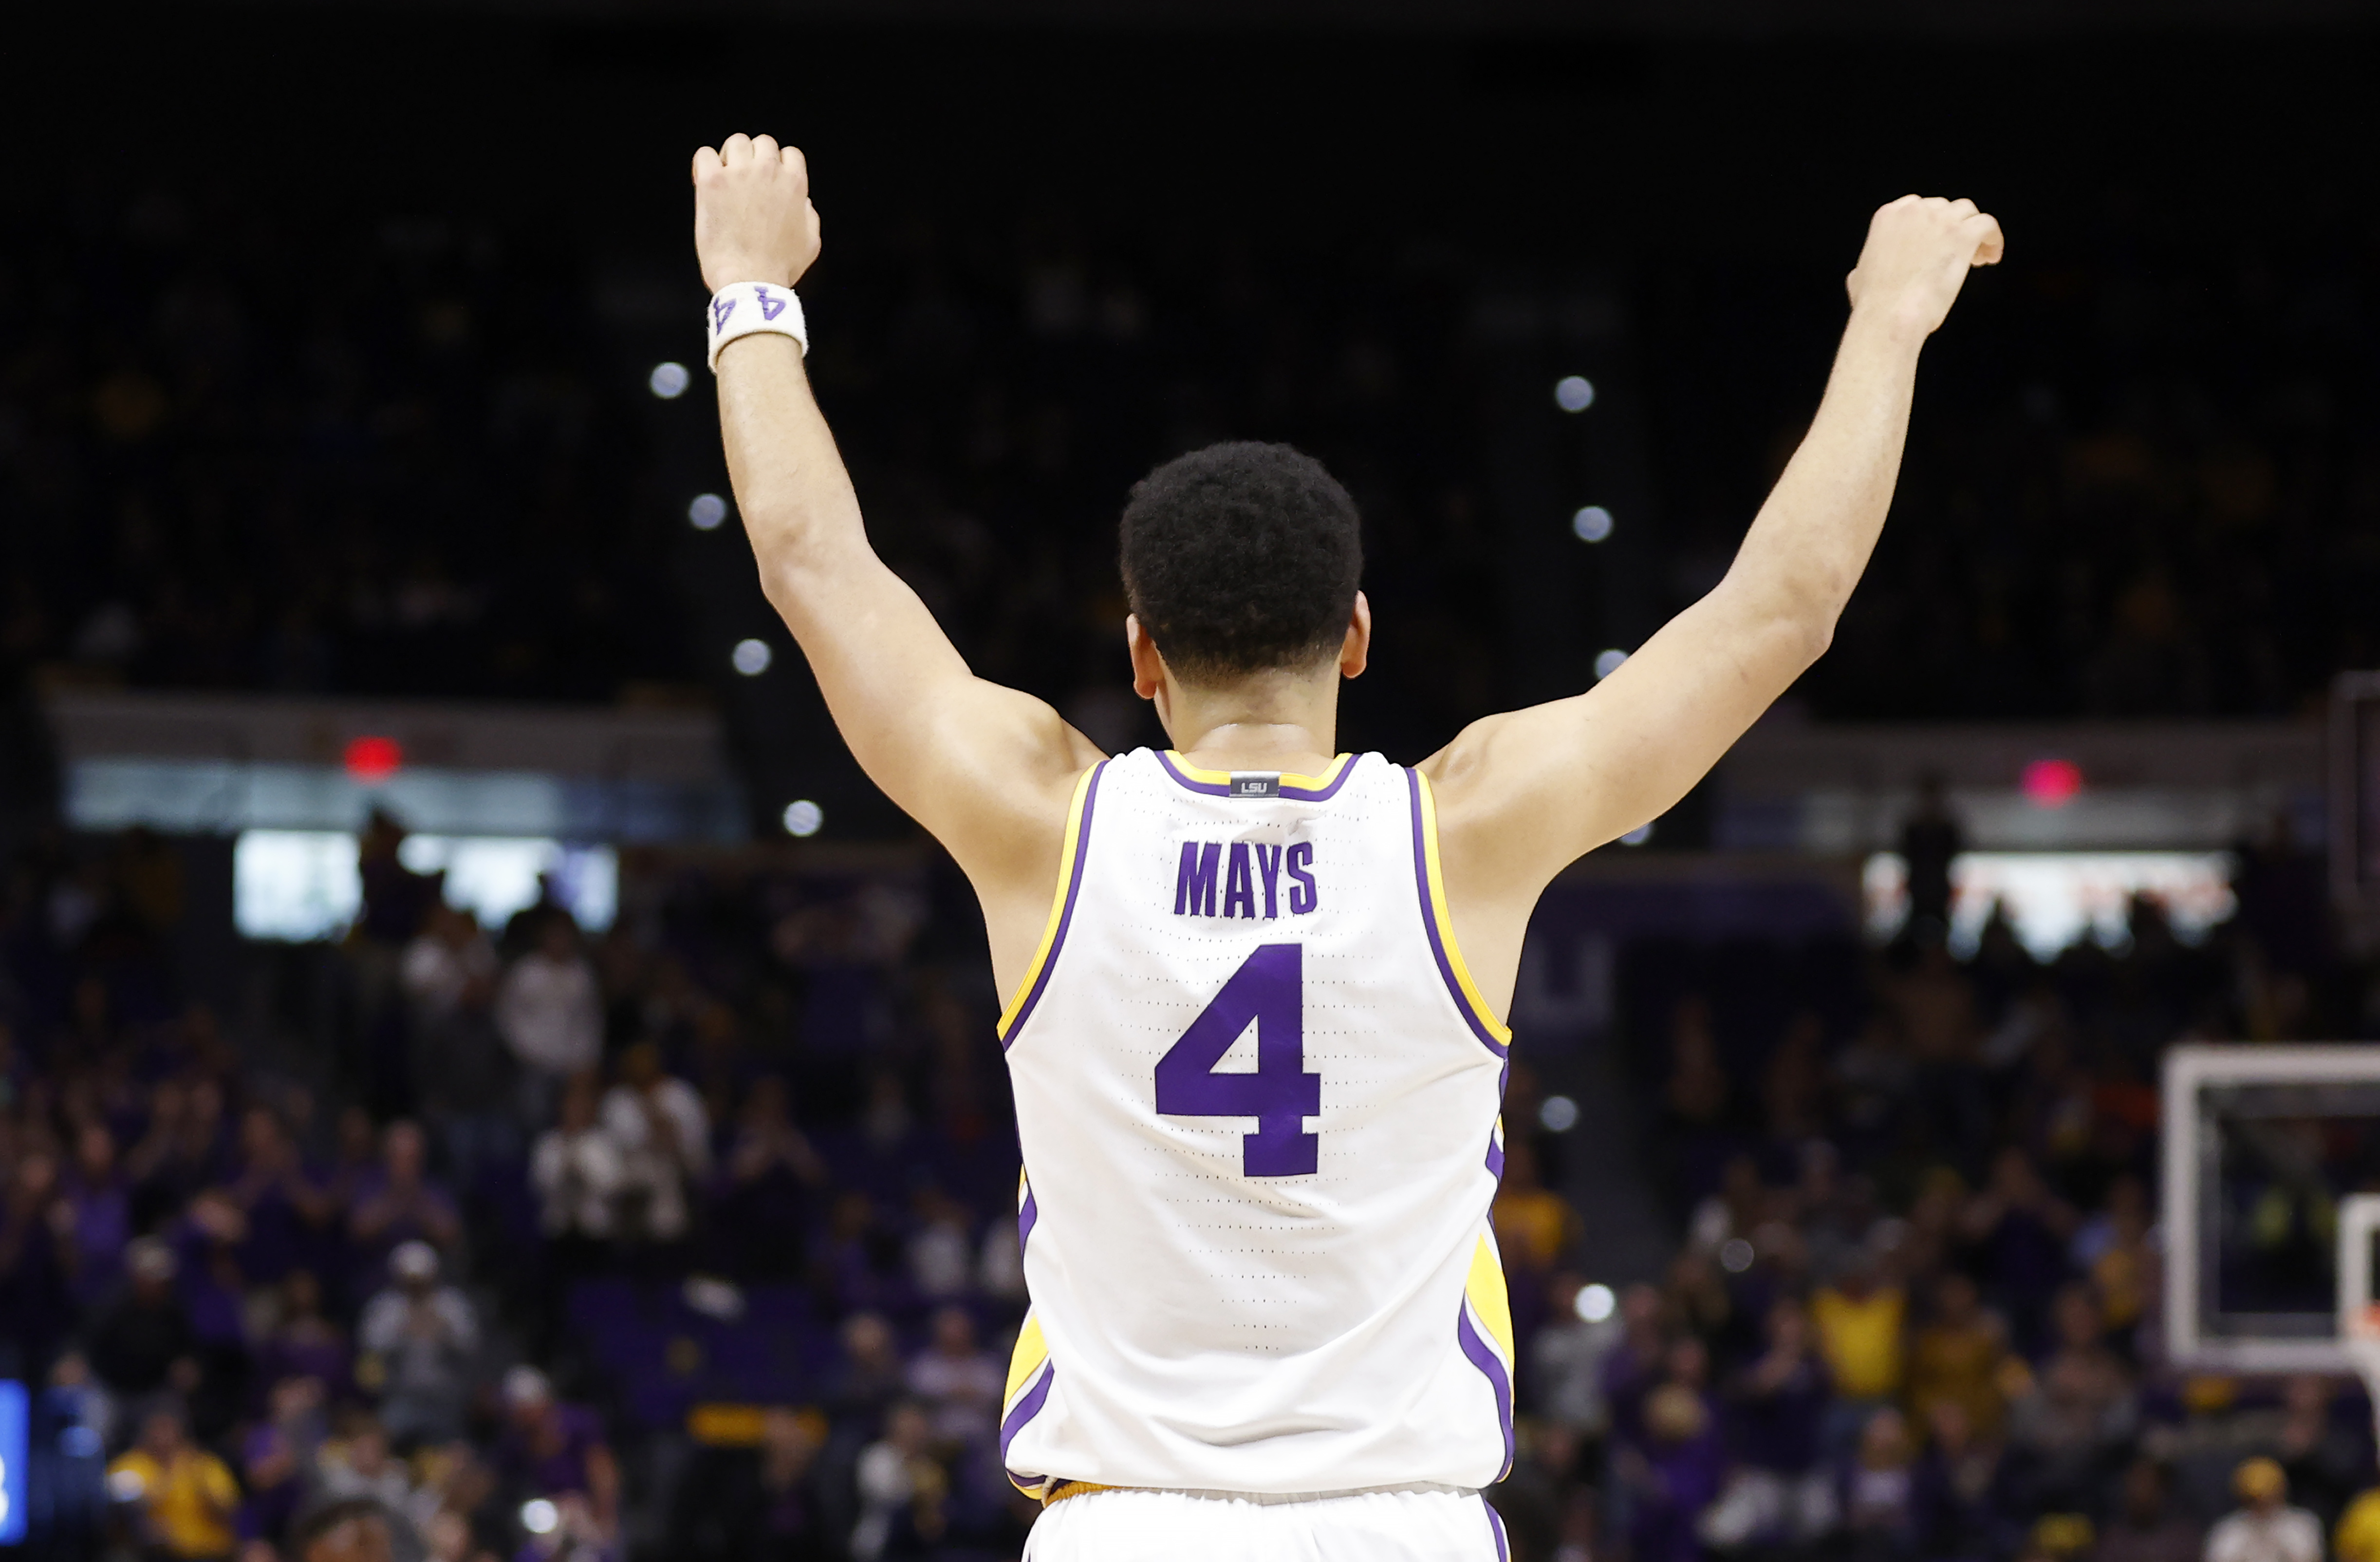 Mar 7, 2020; Baton Rouge, Louisiana, USA; LSU Tigers guard Skylar Mays (4) reacts to a play against Georgia Bulldogs during the second half at Maravich Assembly Center. 